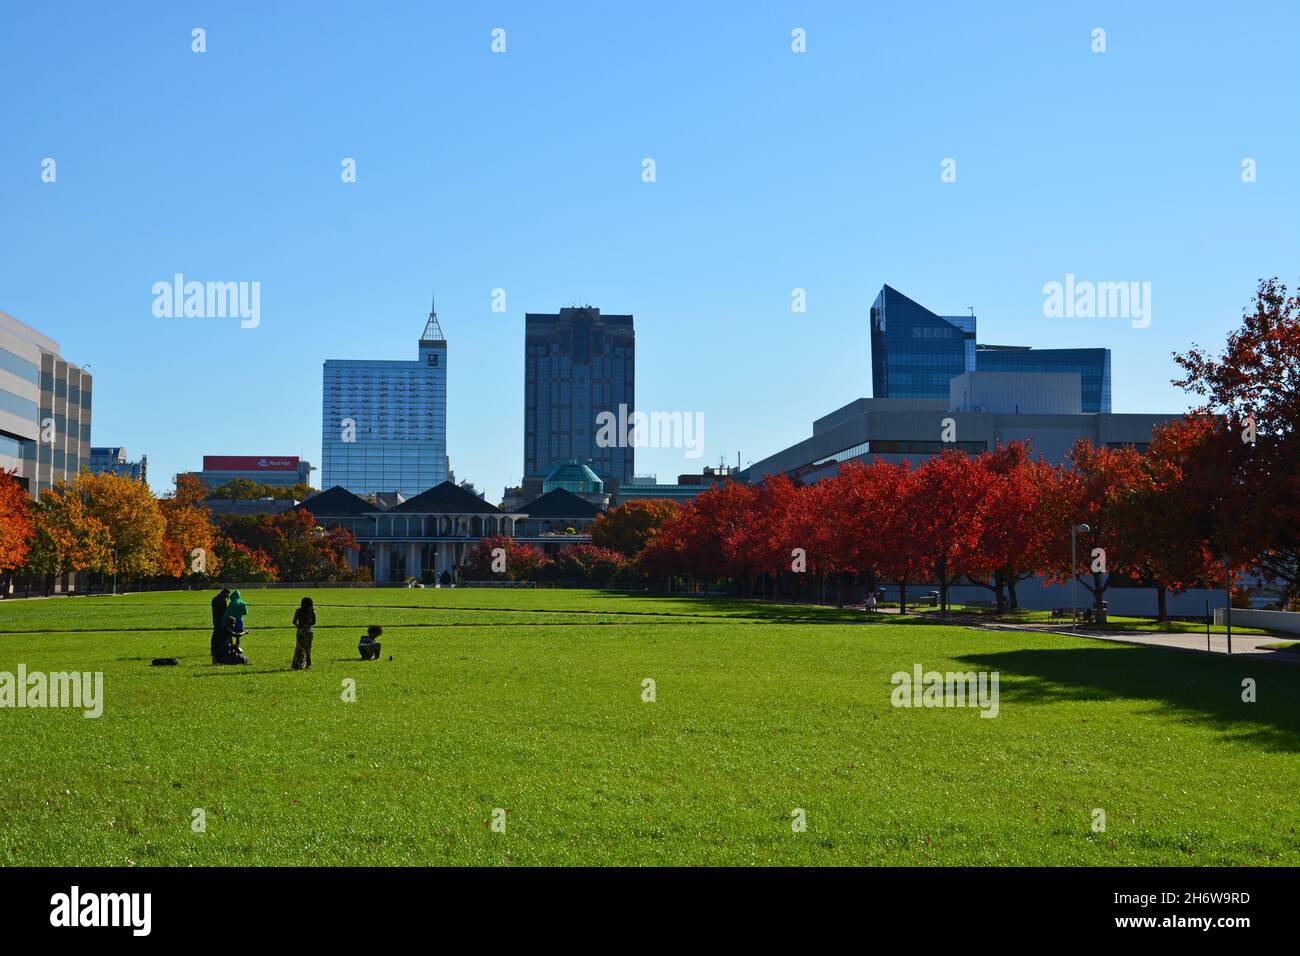 The skyline rises above the lawn between government buildings on Halifax Mall in Raleigh, NC. Stock Photo